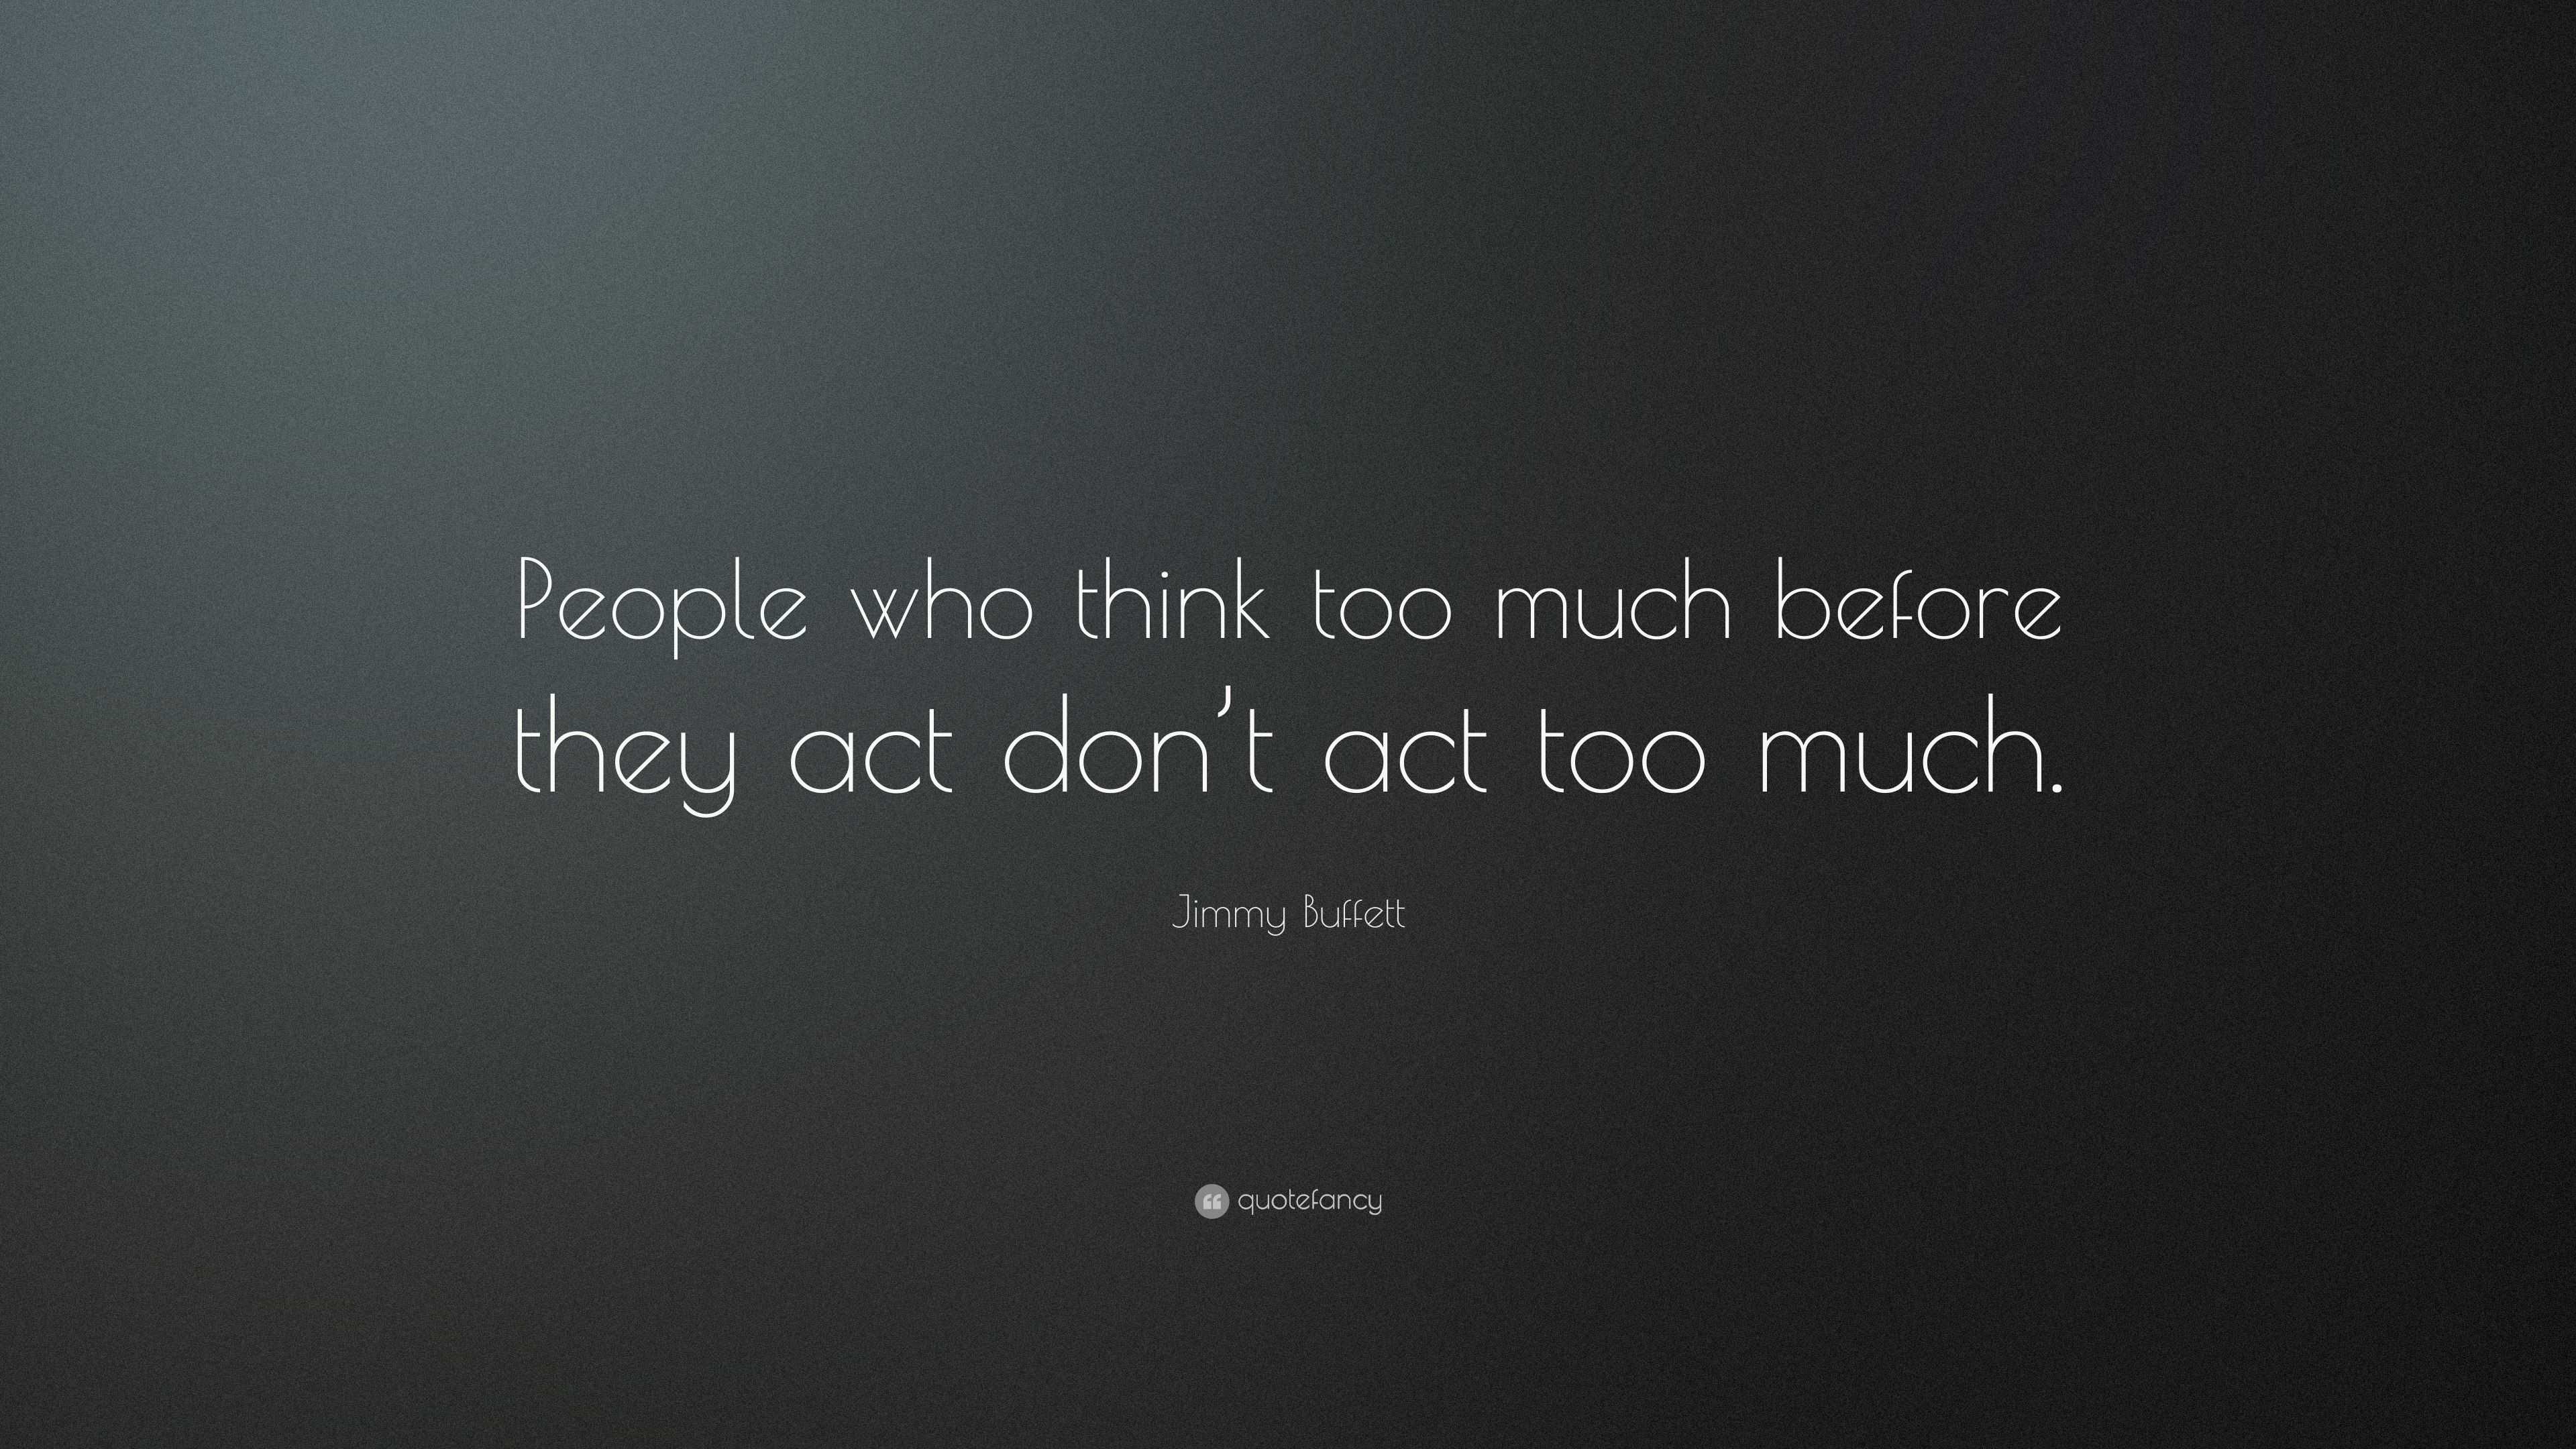 Jimmy Buffett Quote: “People who think too much before they act don’t ...